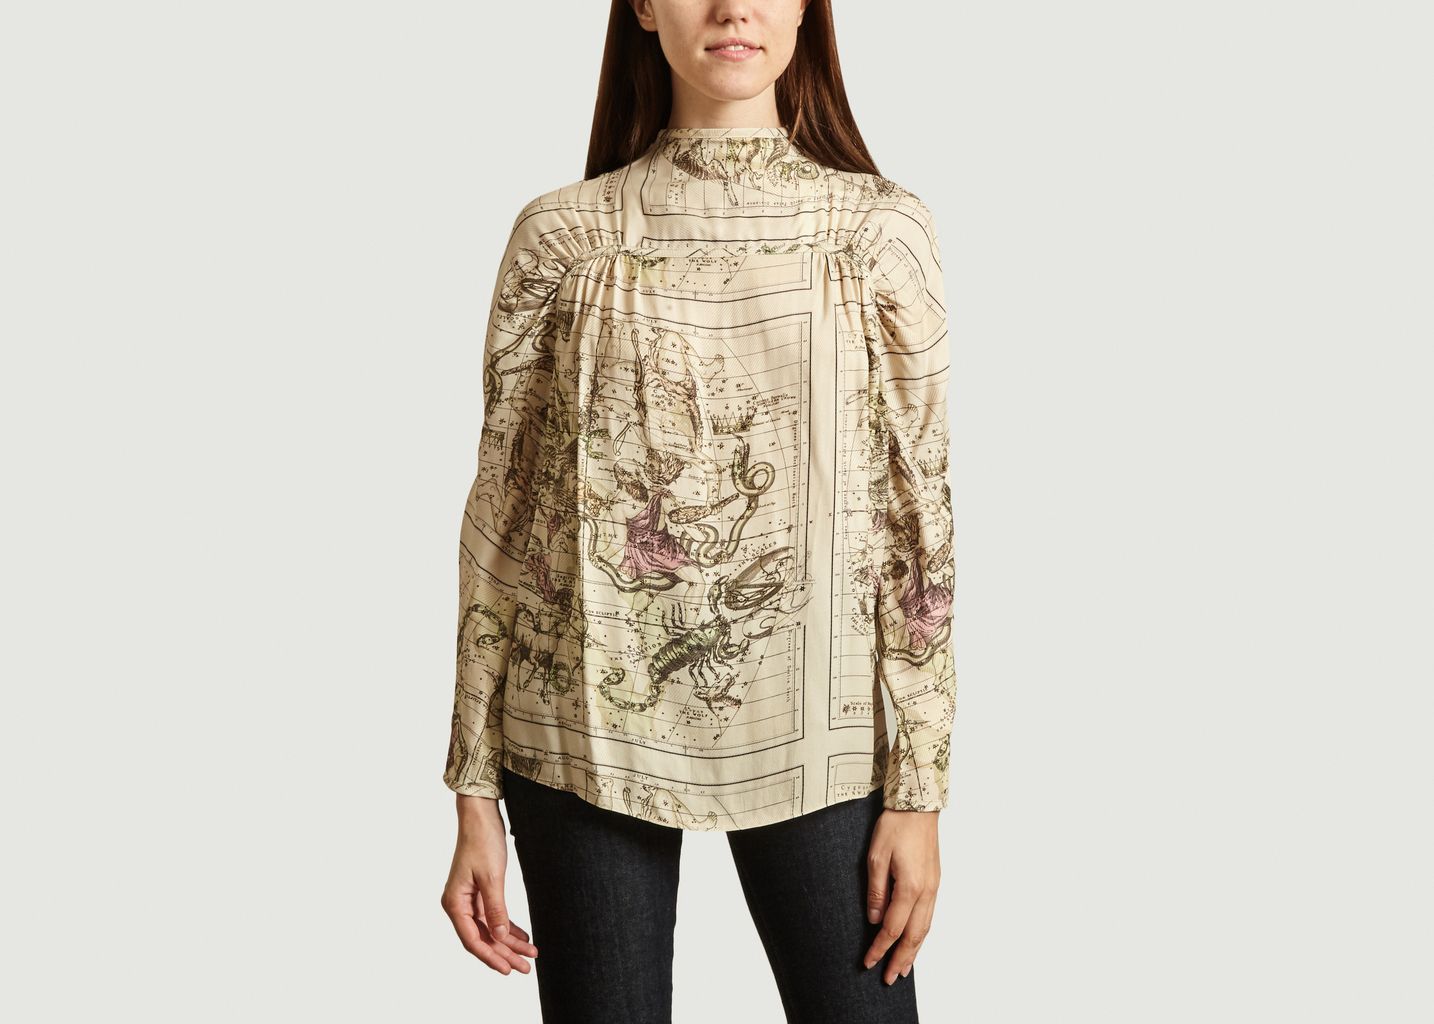 Beaune printed blouse - By Malene Birger